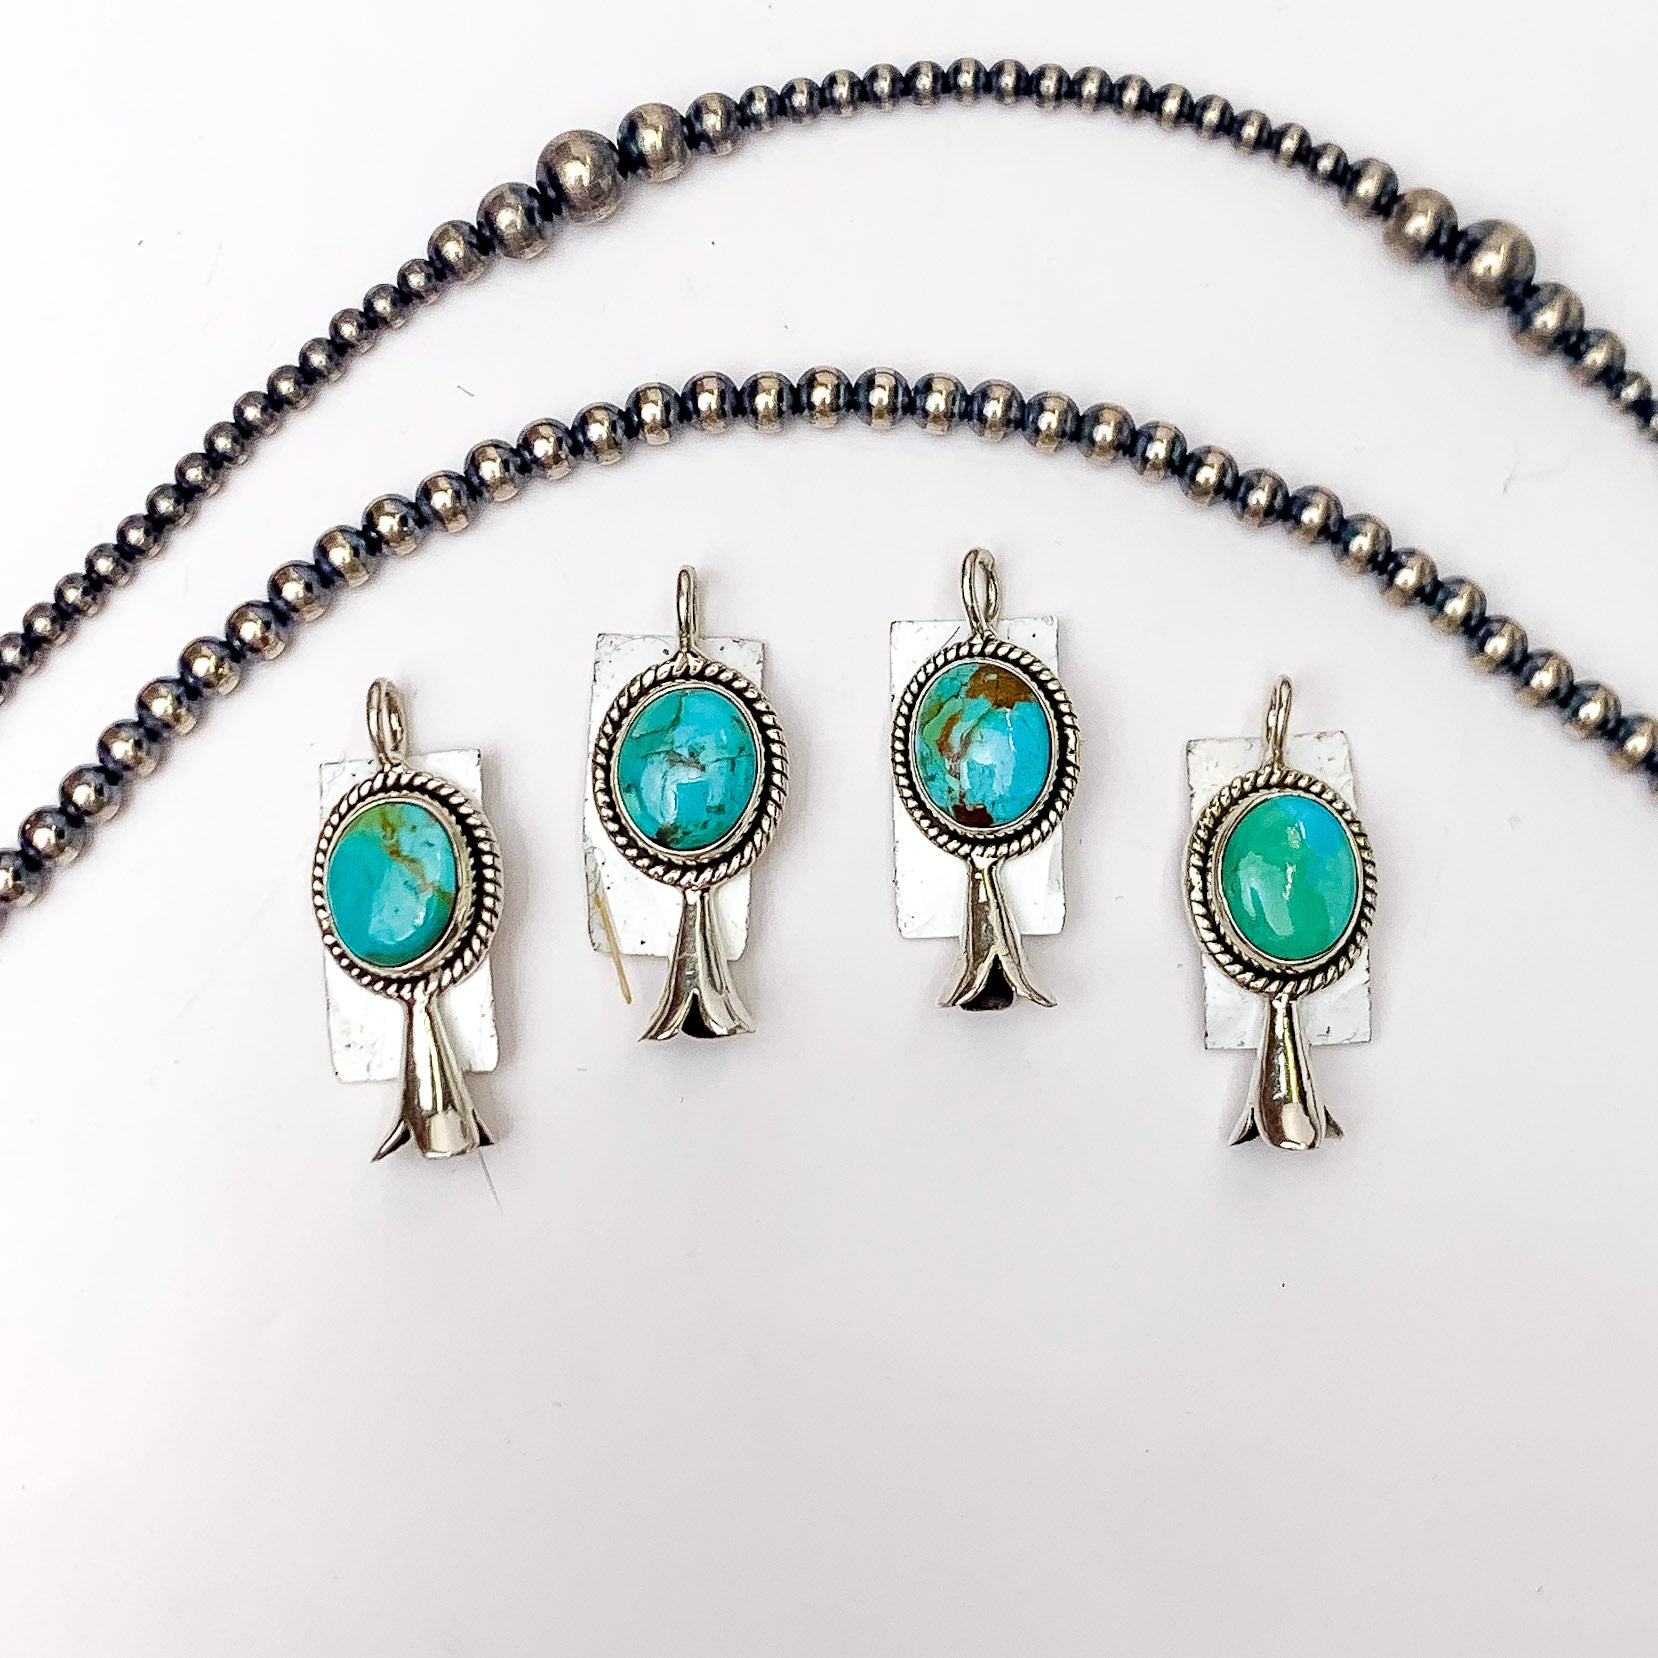 In the picture are handmade circle pendants that include genuine sterling silver and genuine kingman turquoise stones with a white background